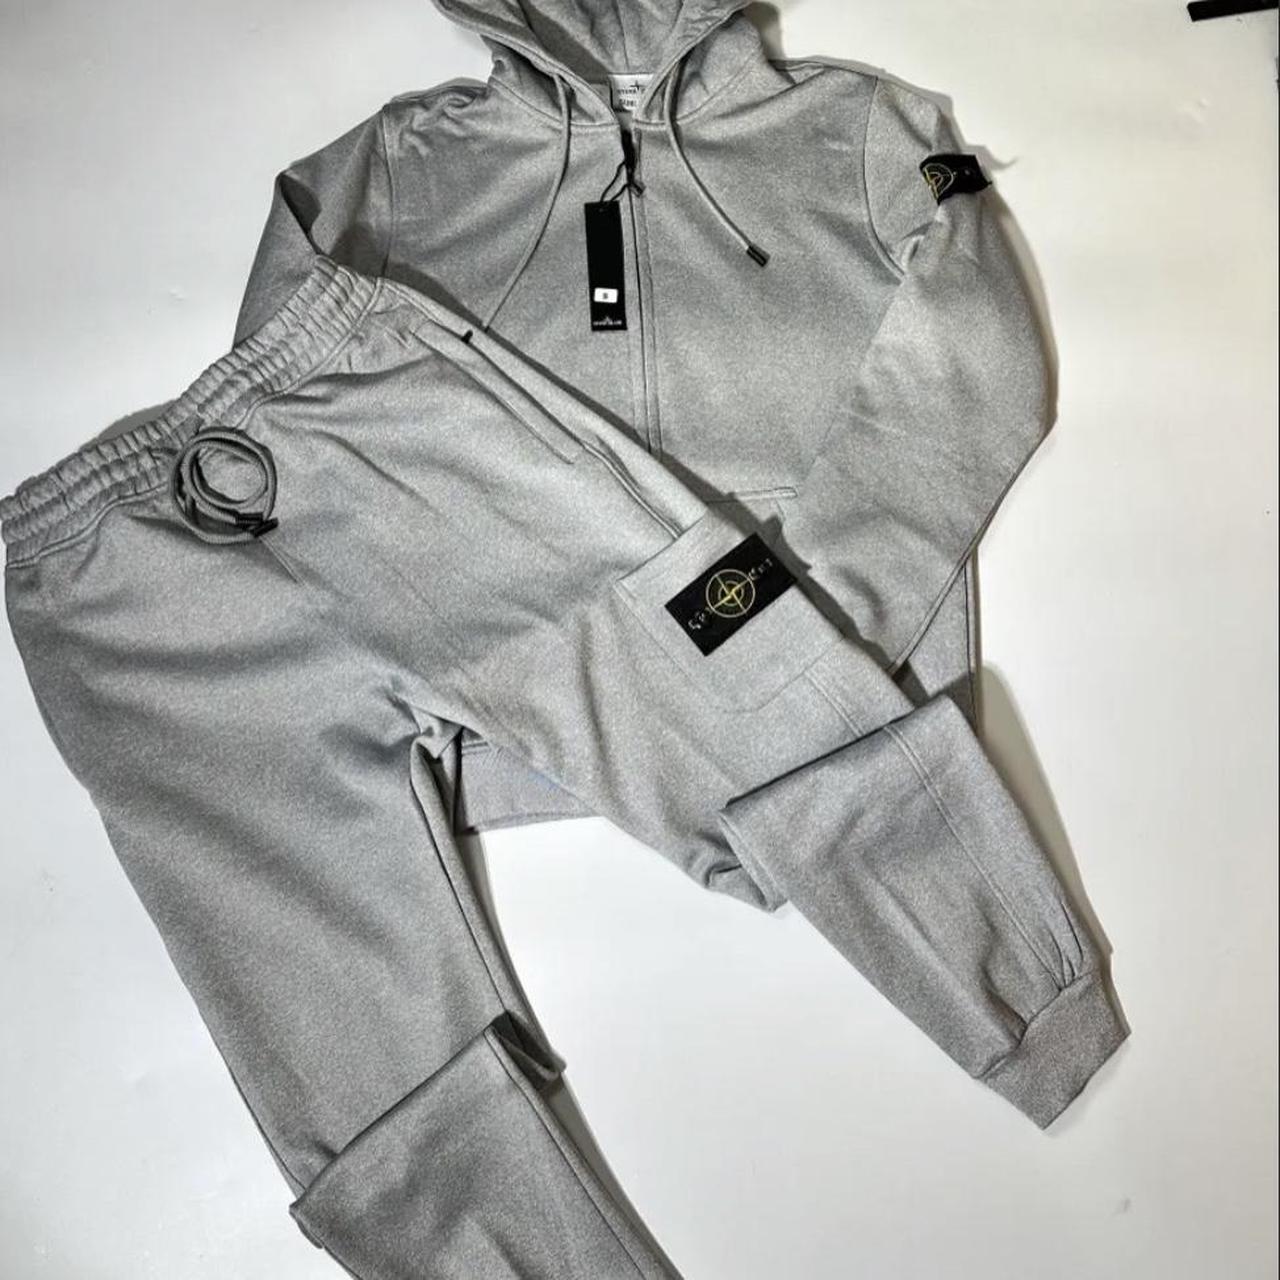 STONE ISLAND TRACKSUIT DIFFERENT COLOURS DIFFERENT... - Depop